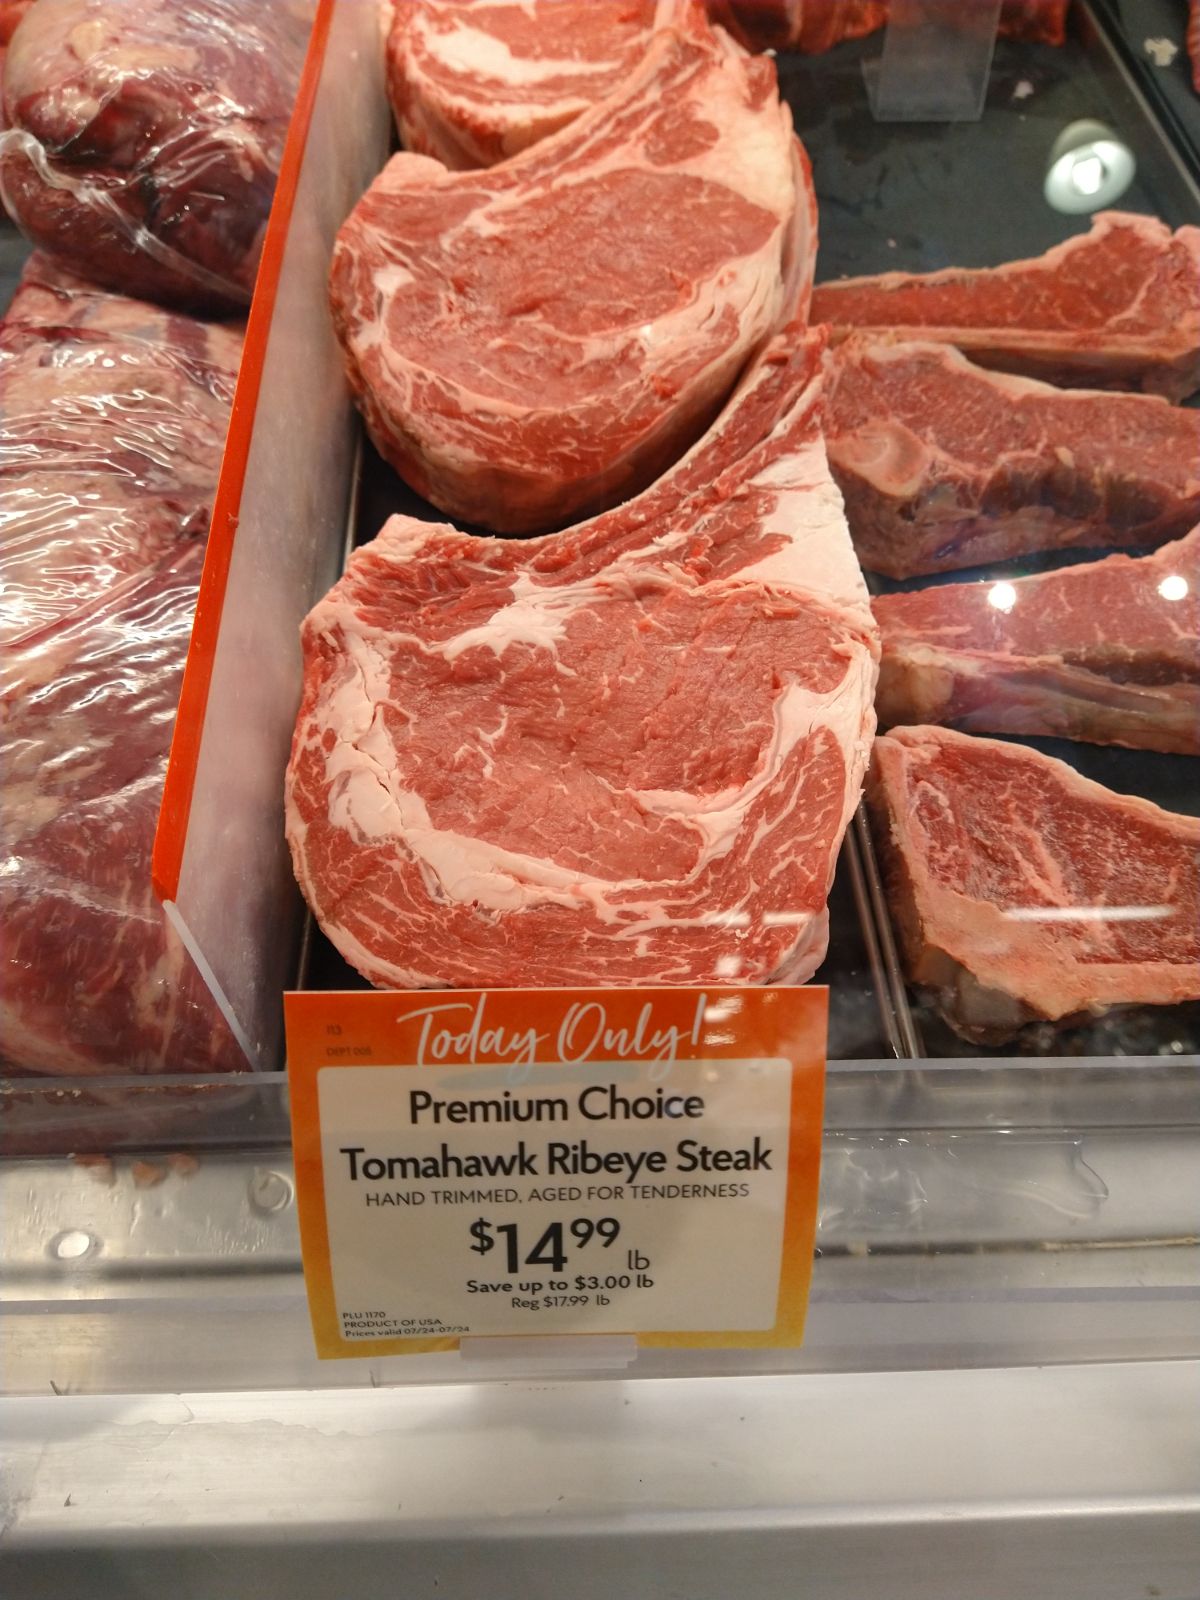 A beef display at a Fresh Market store with tomahawk ribeye steaks that are on sale for $14.99/lb.